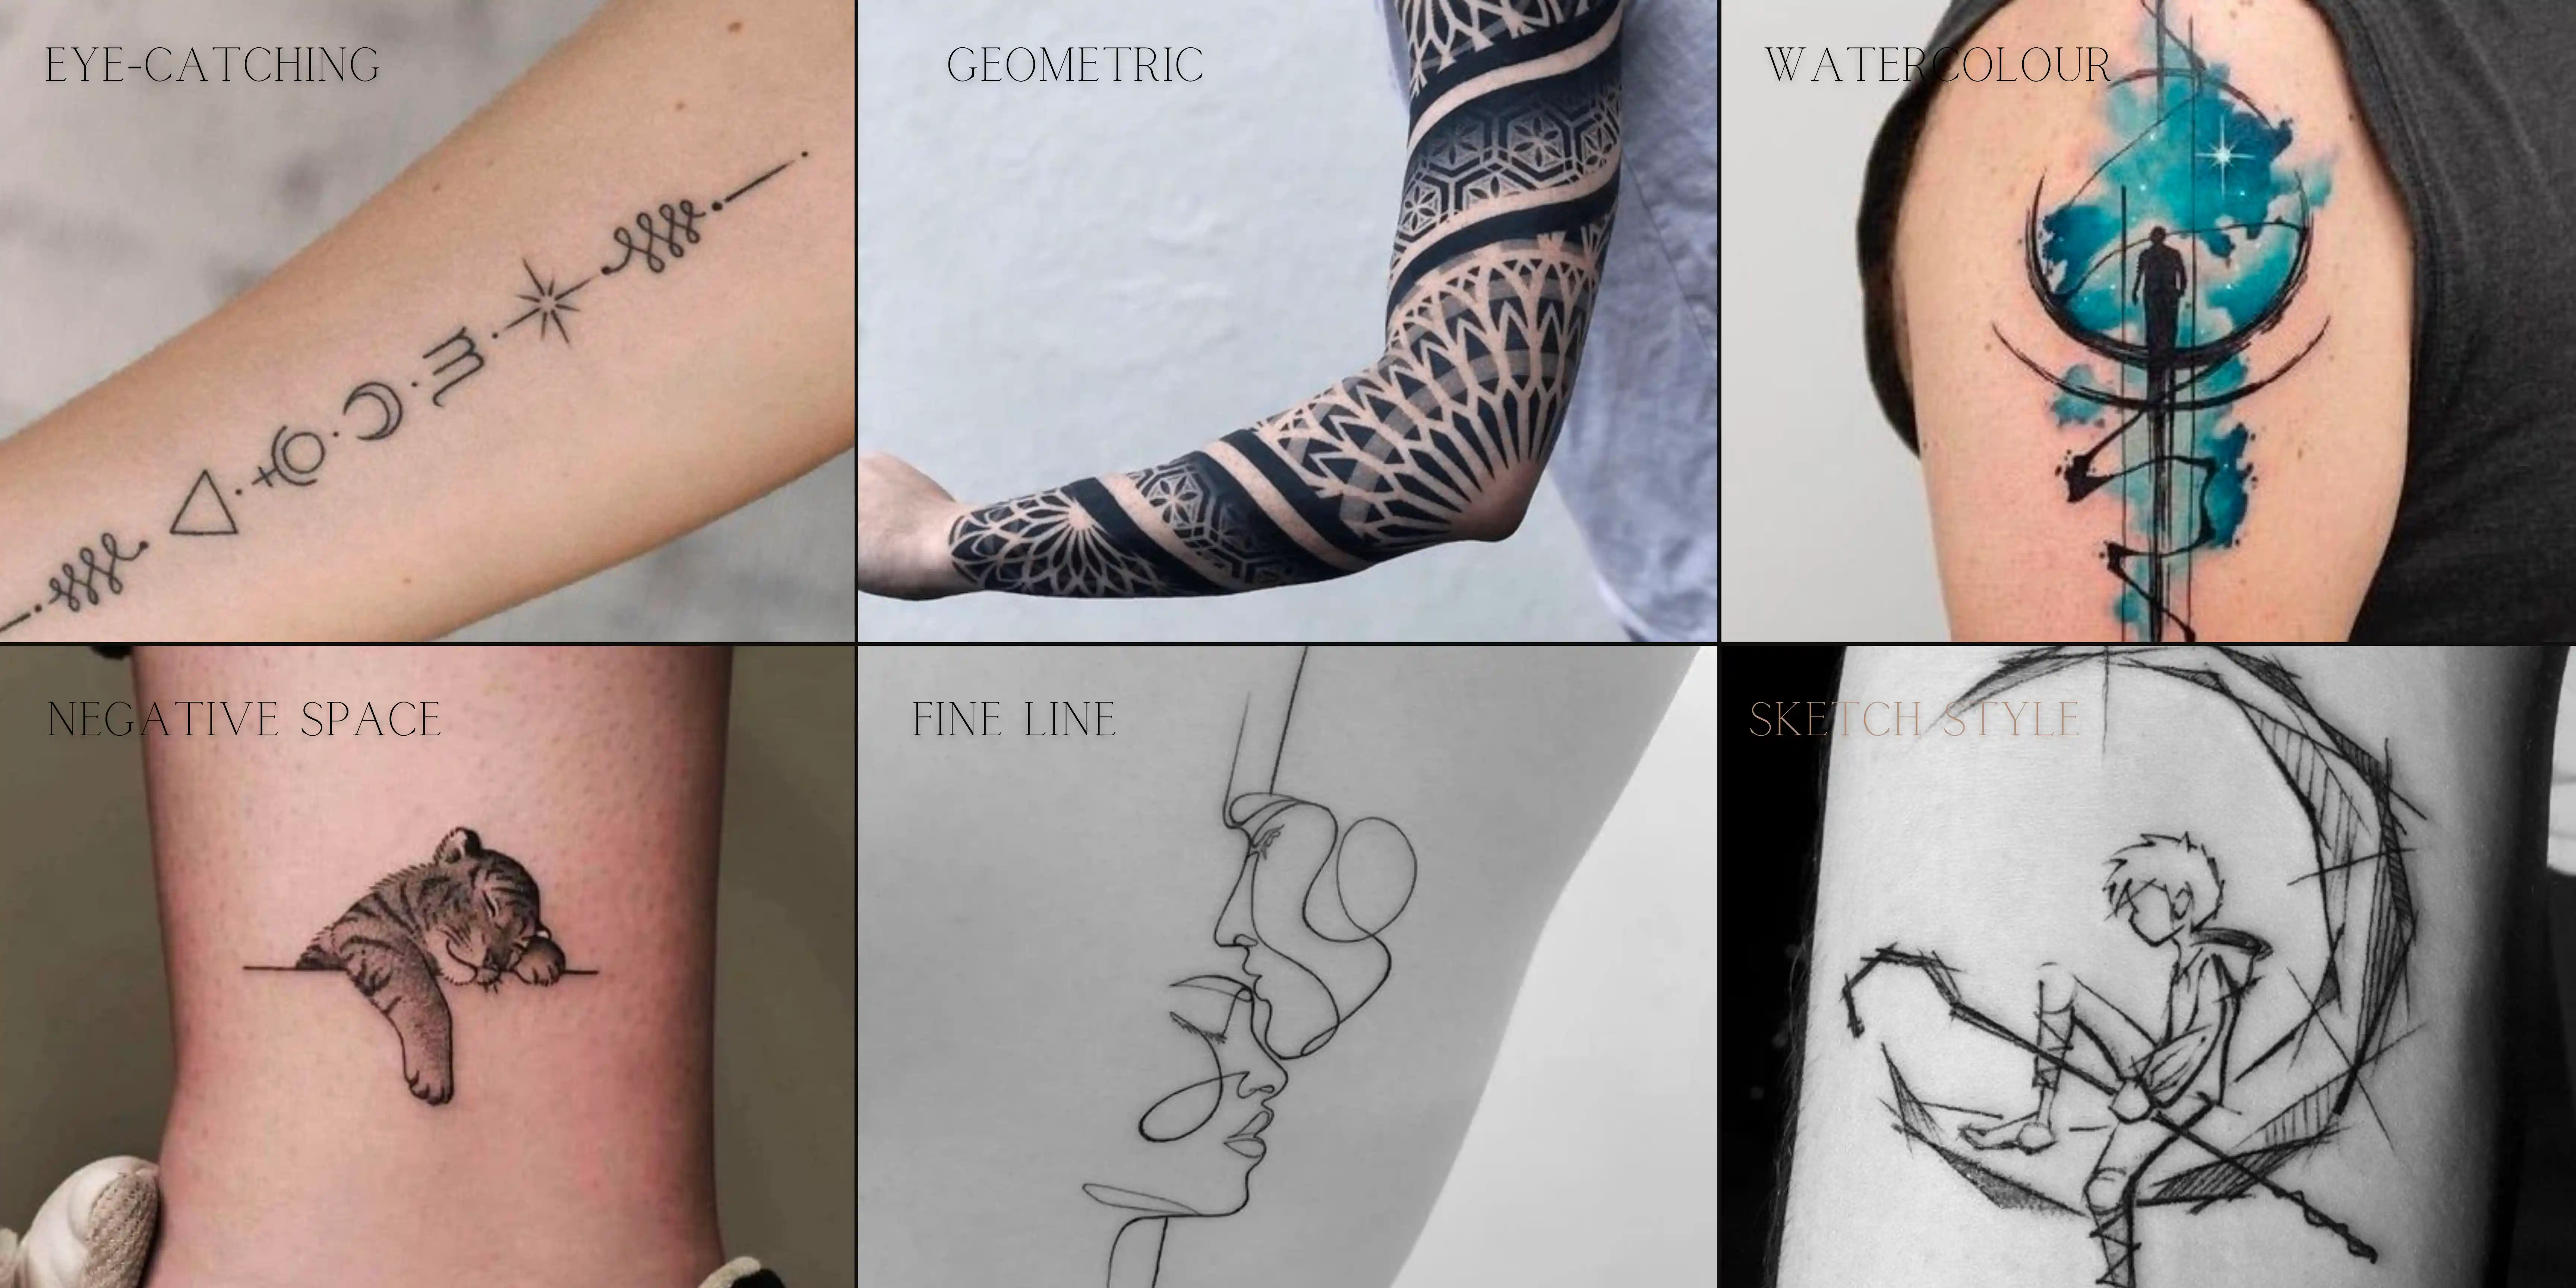 16 Awesome Looking Wrist Tattoos for Girls - Tattoo Design Gallery | Tattoos,  Lace tattoo, Girl tattoos